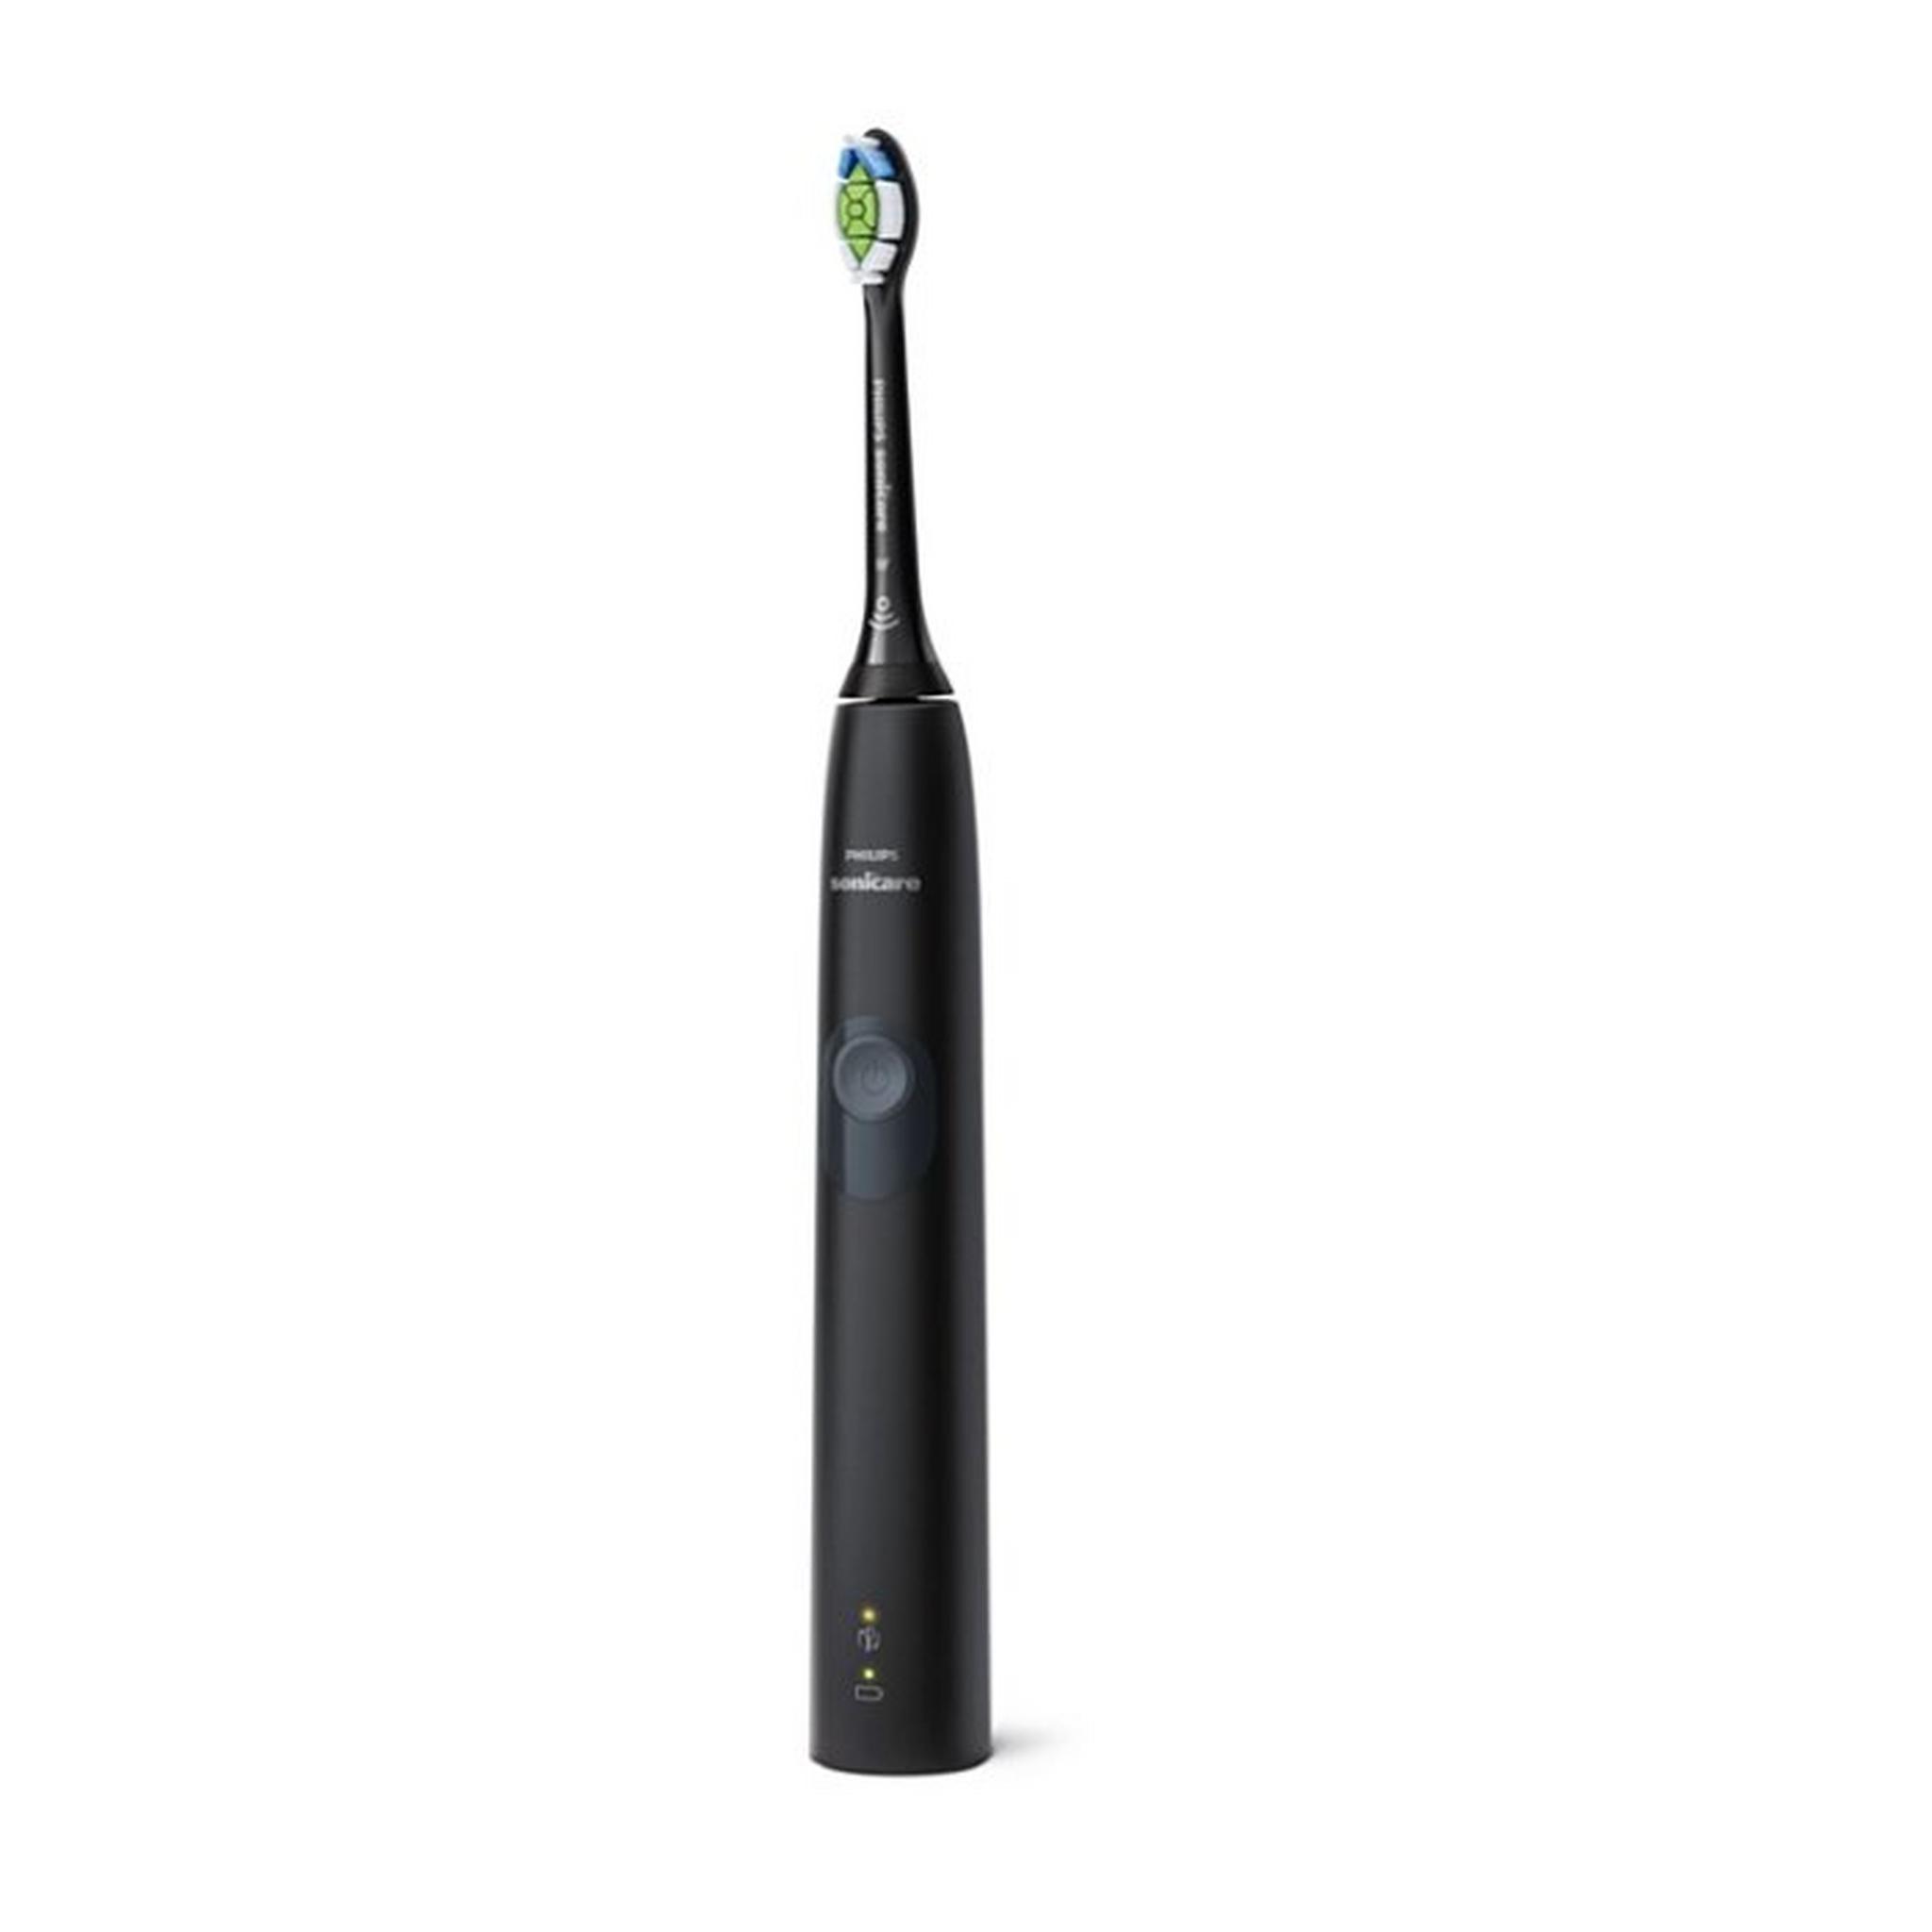 Philips Sonicare ProtectiveClean 4300 Sonic Electric Toothbrush - Black